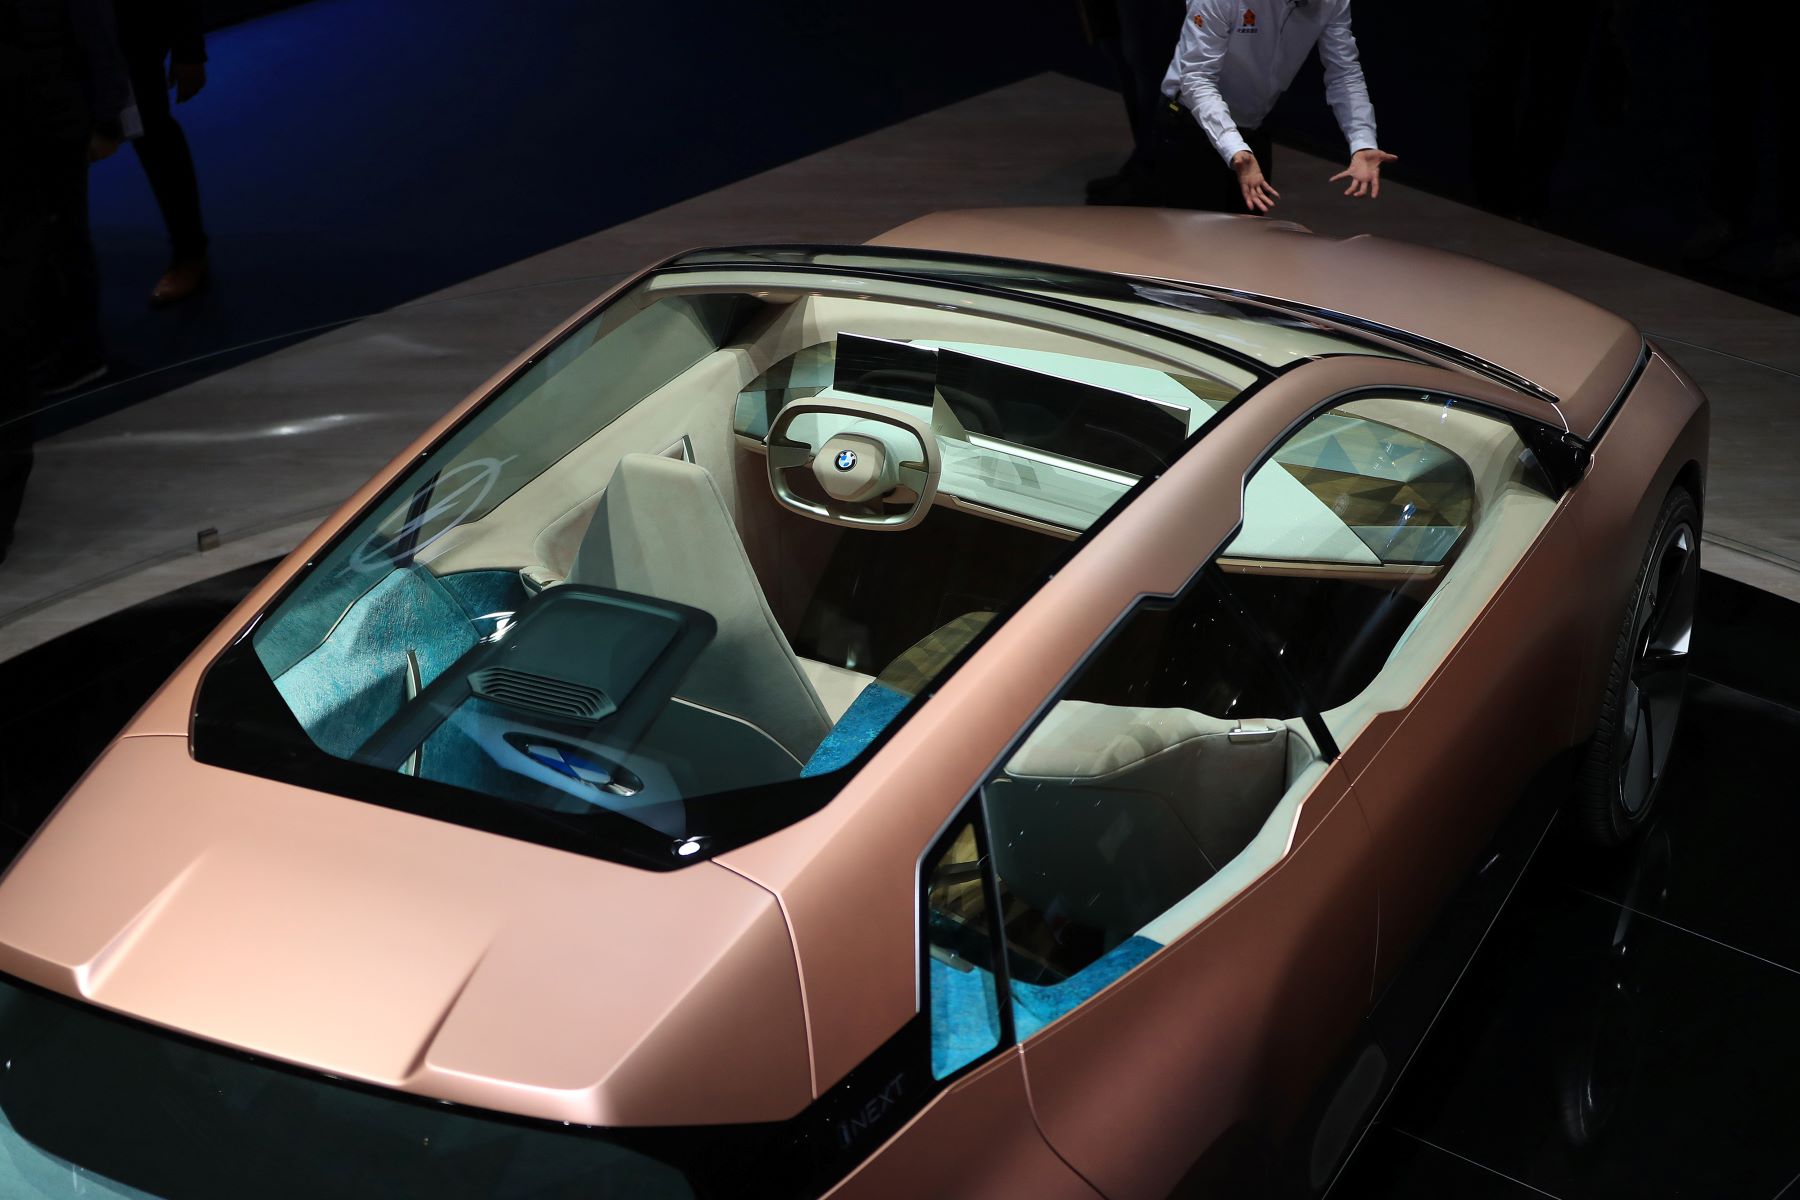 The sunroof of the BMW Vision i Next seen at the 68th IAA Frankfurt Automobile Show in Germany